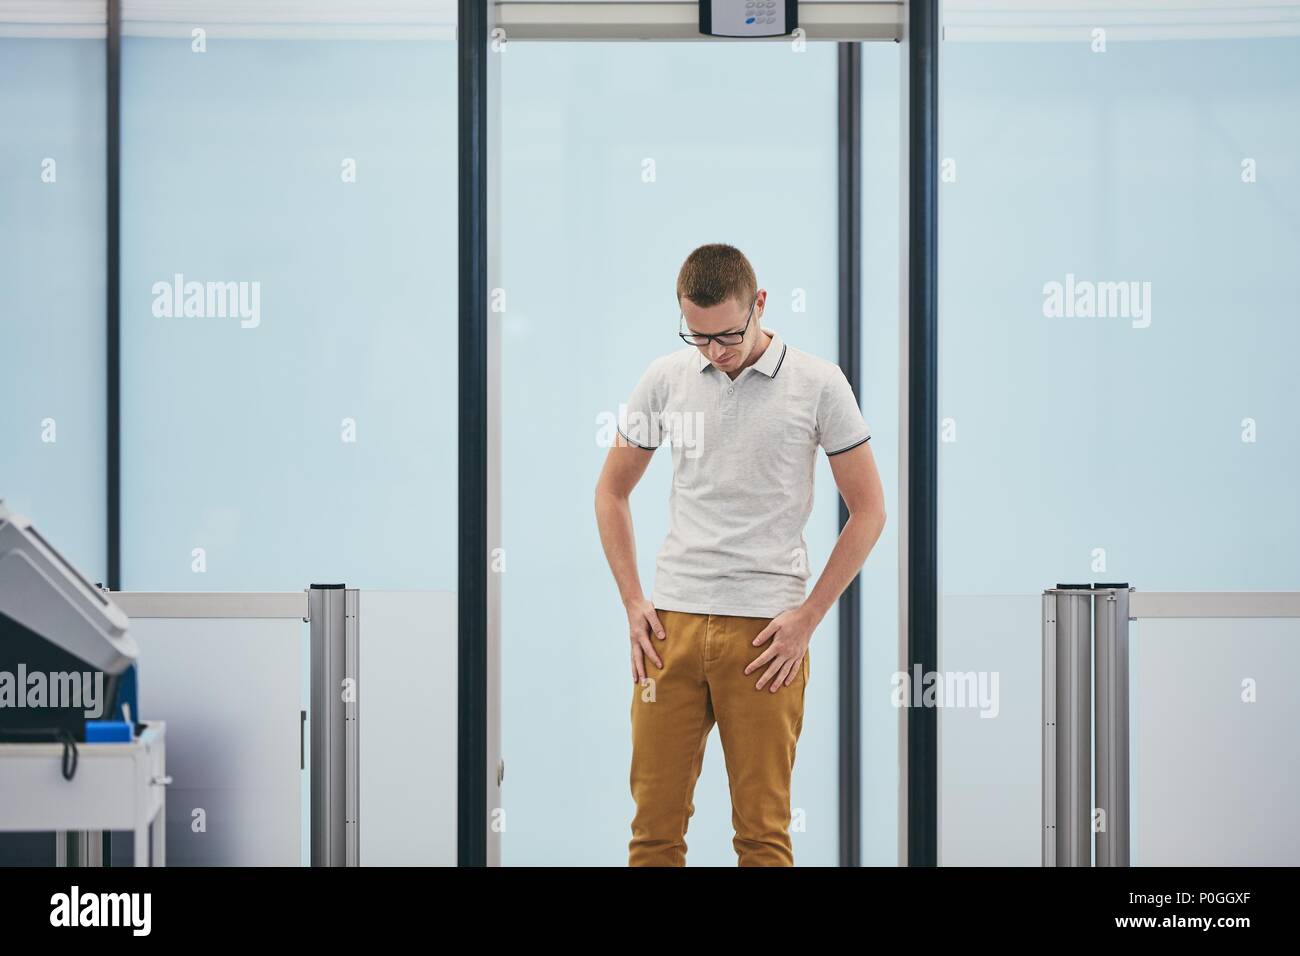 Airport security check. Young man (traveler) in gate of the metal detector. Stock Photo